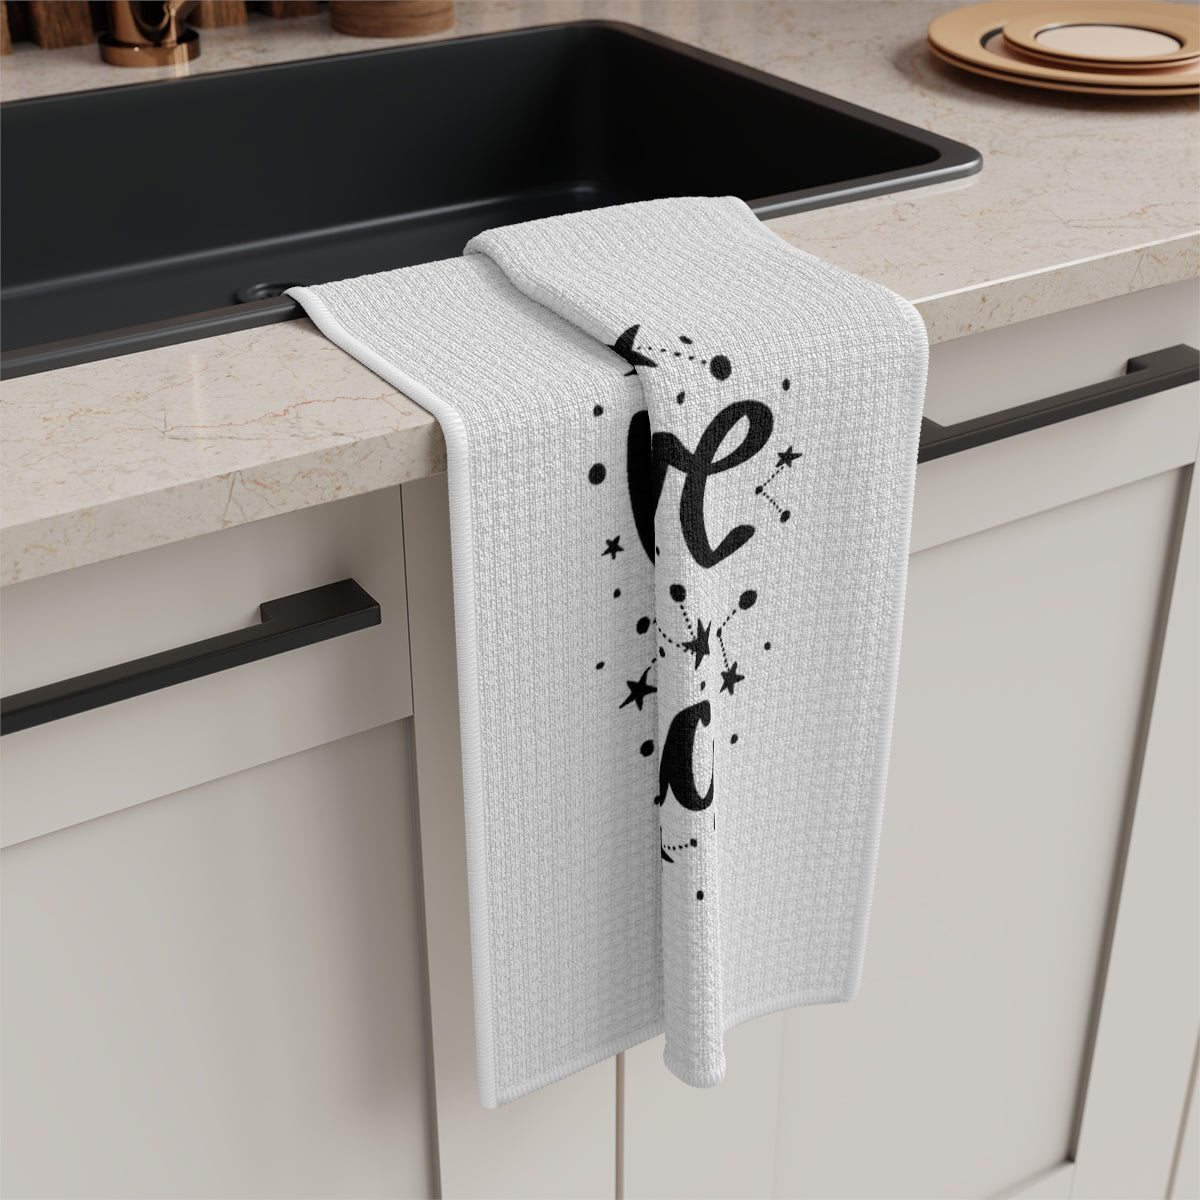 Believe in Magic Tea Towel - Witchy Kitchens